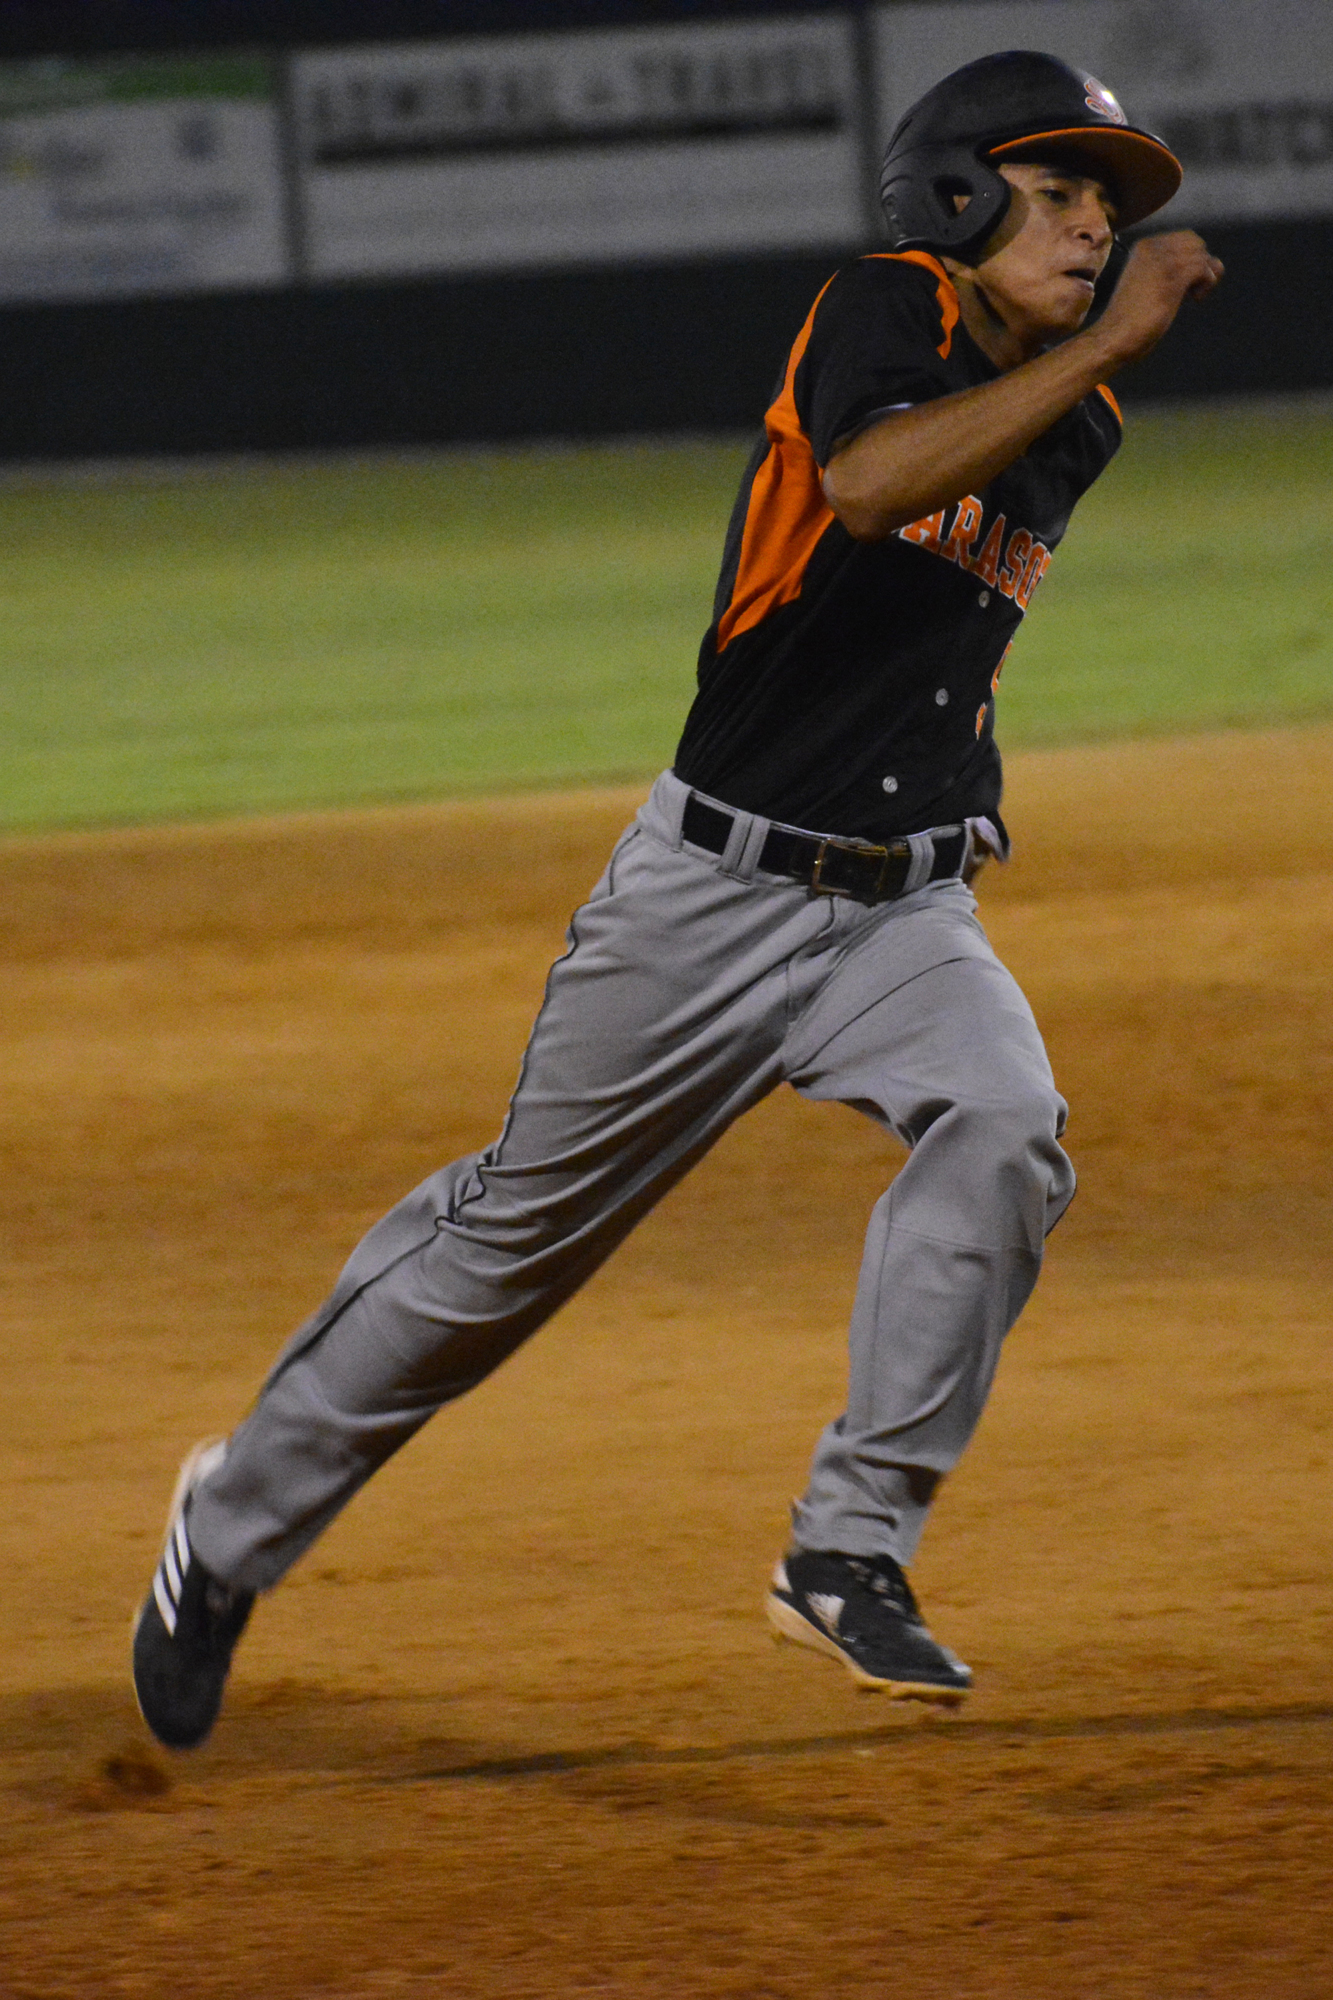 Sailors junior outfielder Uriel Hernandez rounds third base and heads for home to score the game-winning run.